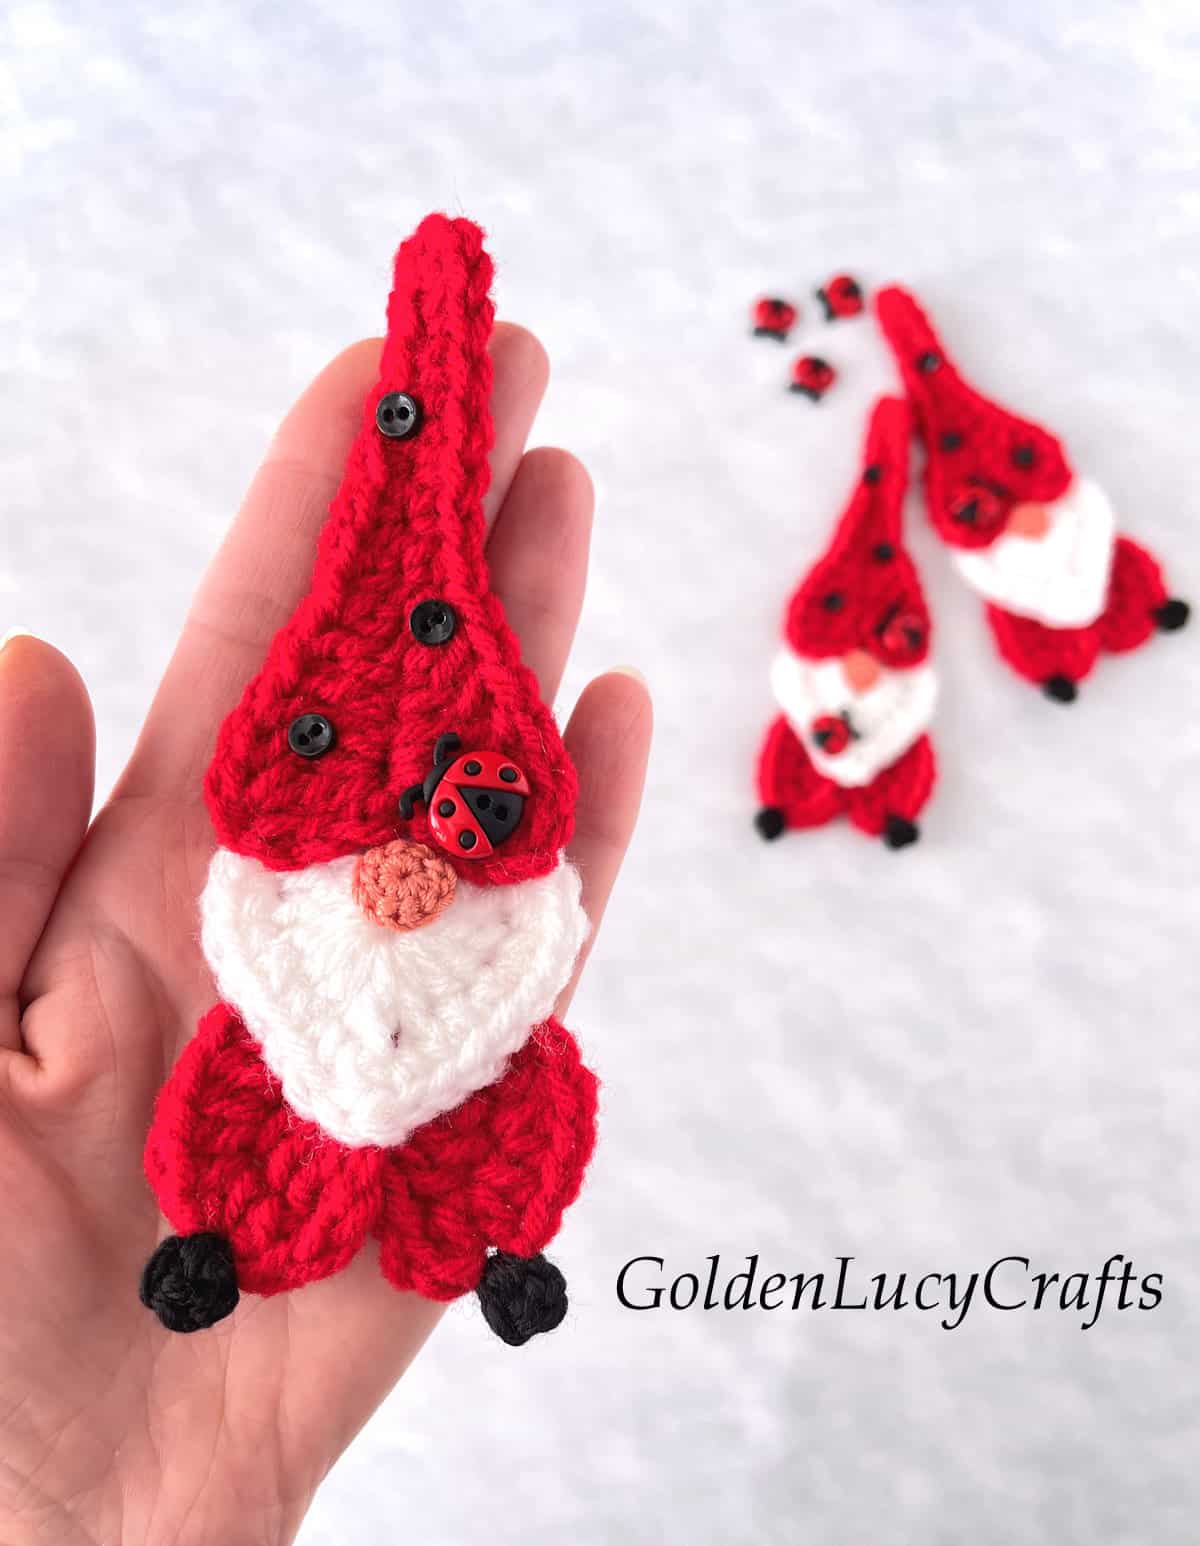 Crochet ladybug gnome in the palm of a hand.